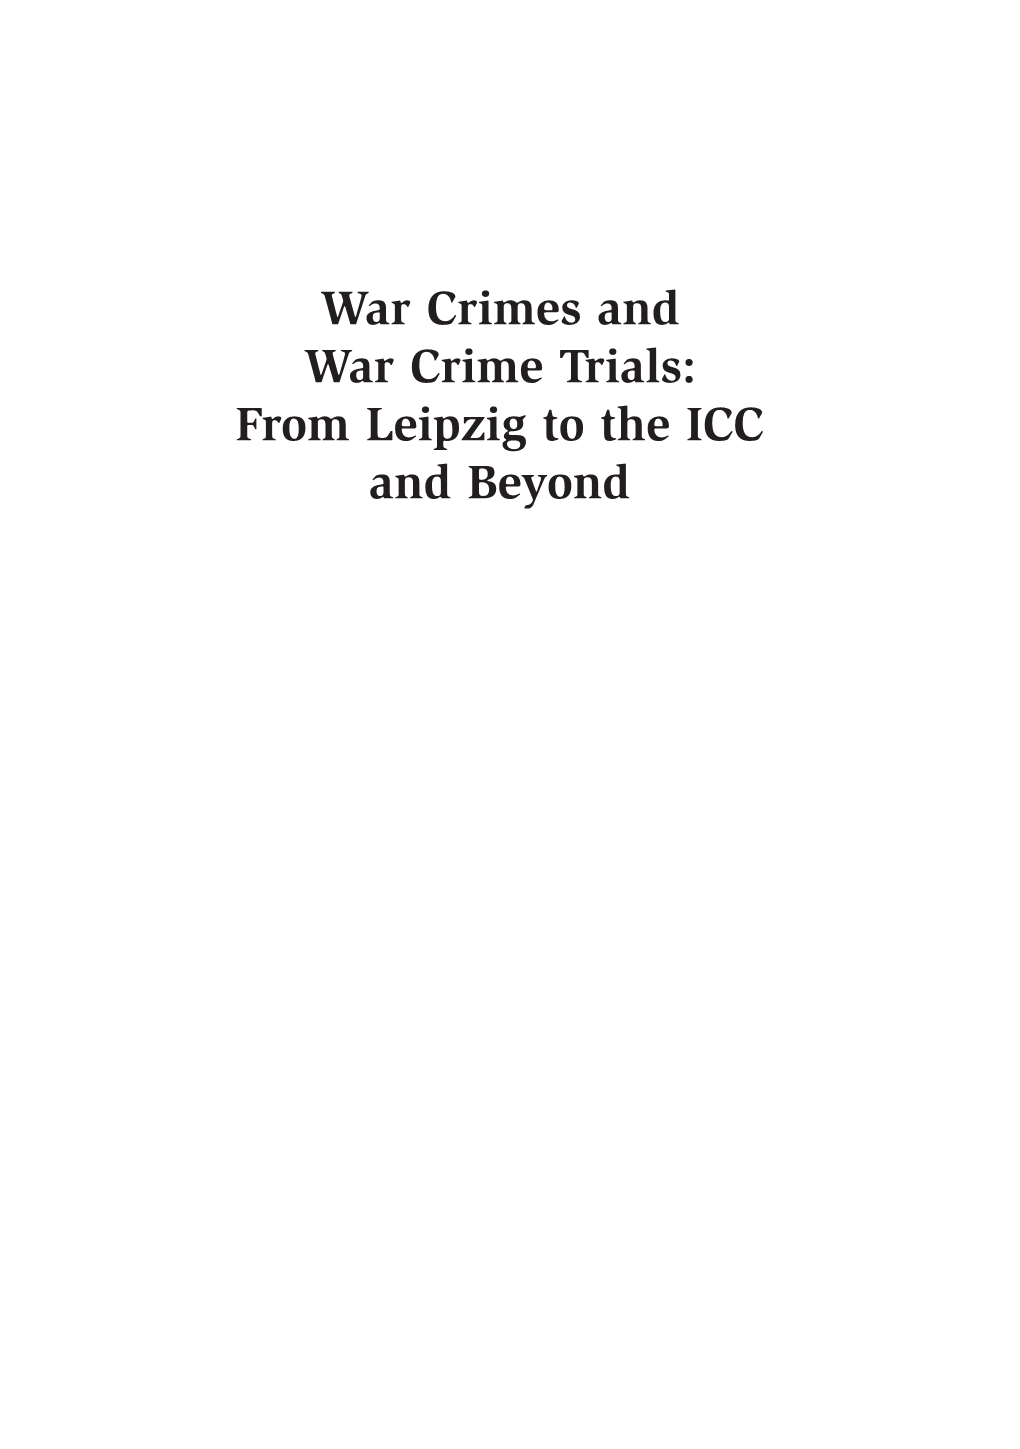 War Crimes and War Crime Trials: from Leipzig to the ICC and Beyond Watkins 00 Fmt Auto3 11/30/05 2:15 PM Page Ii